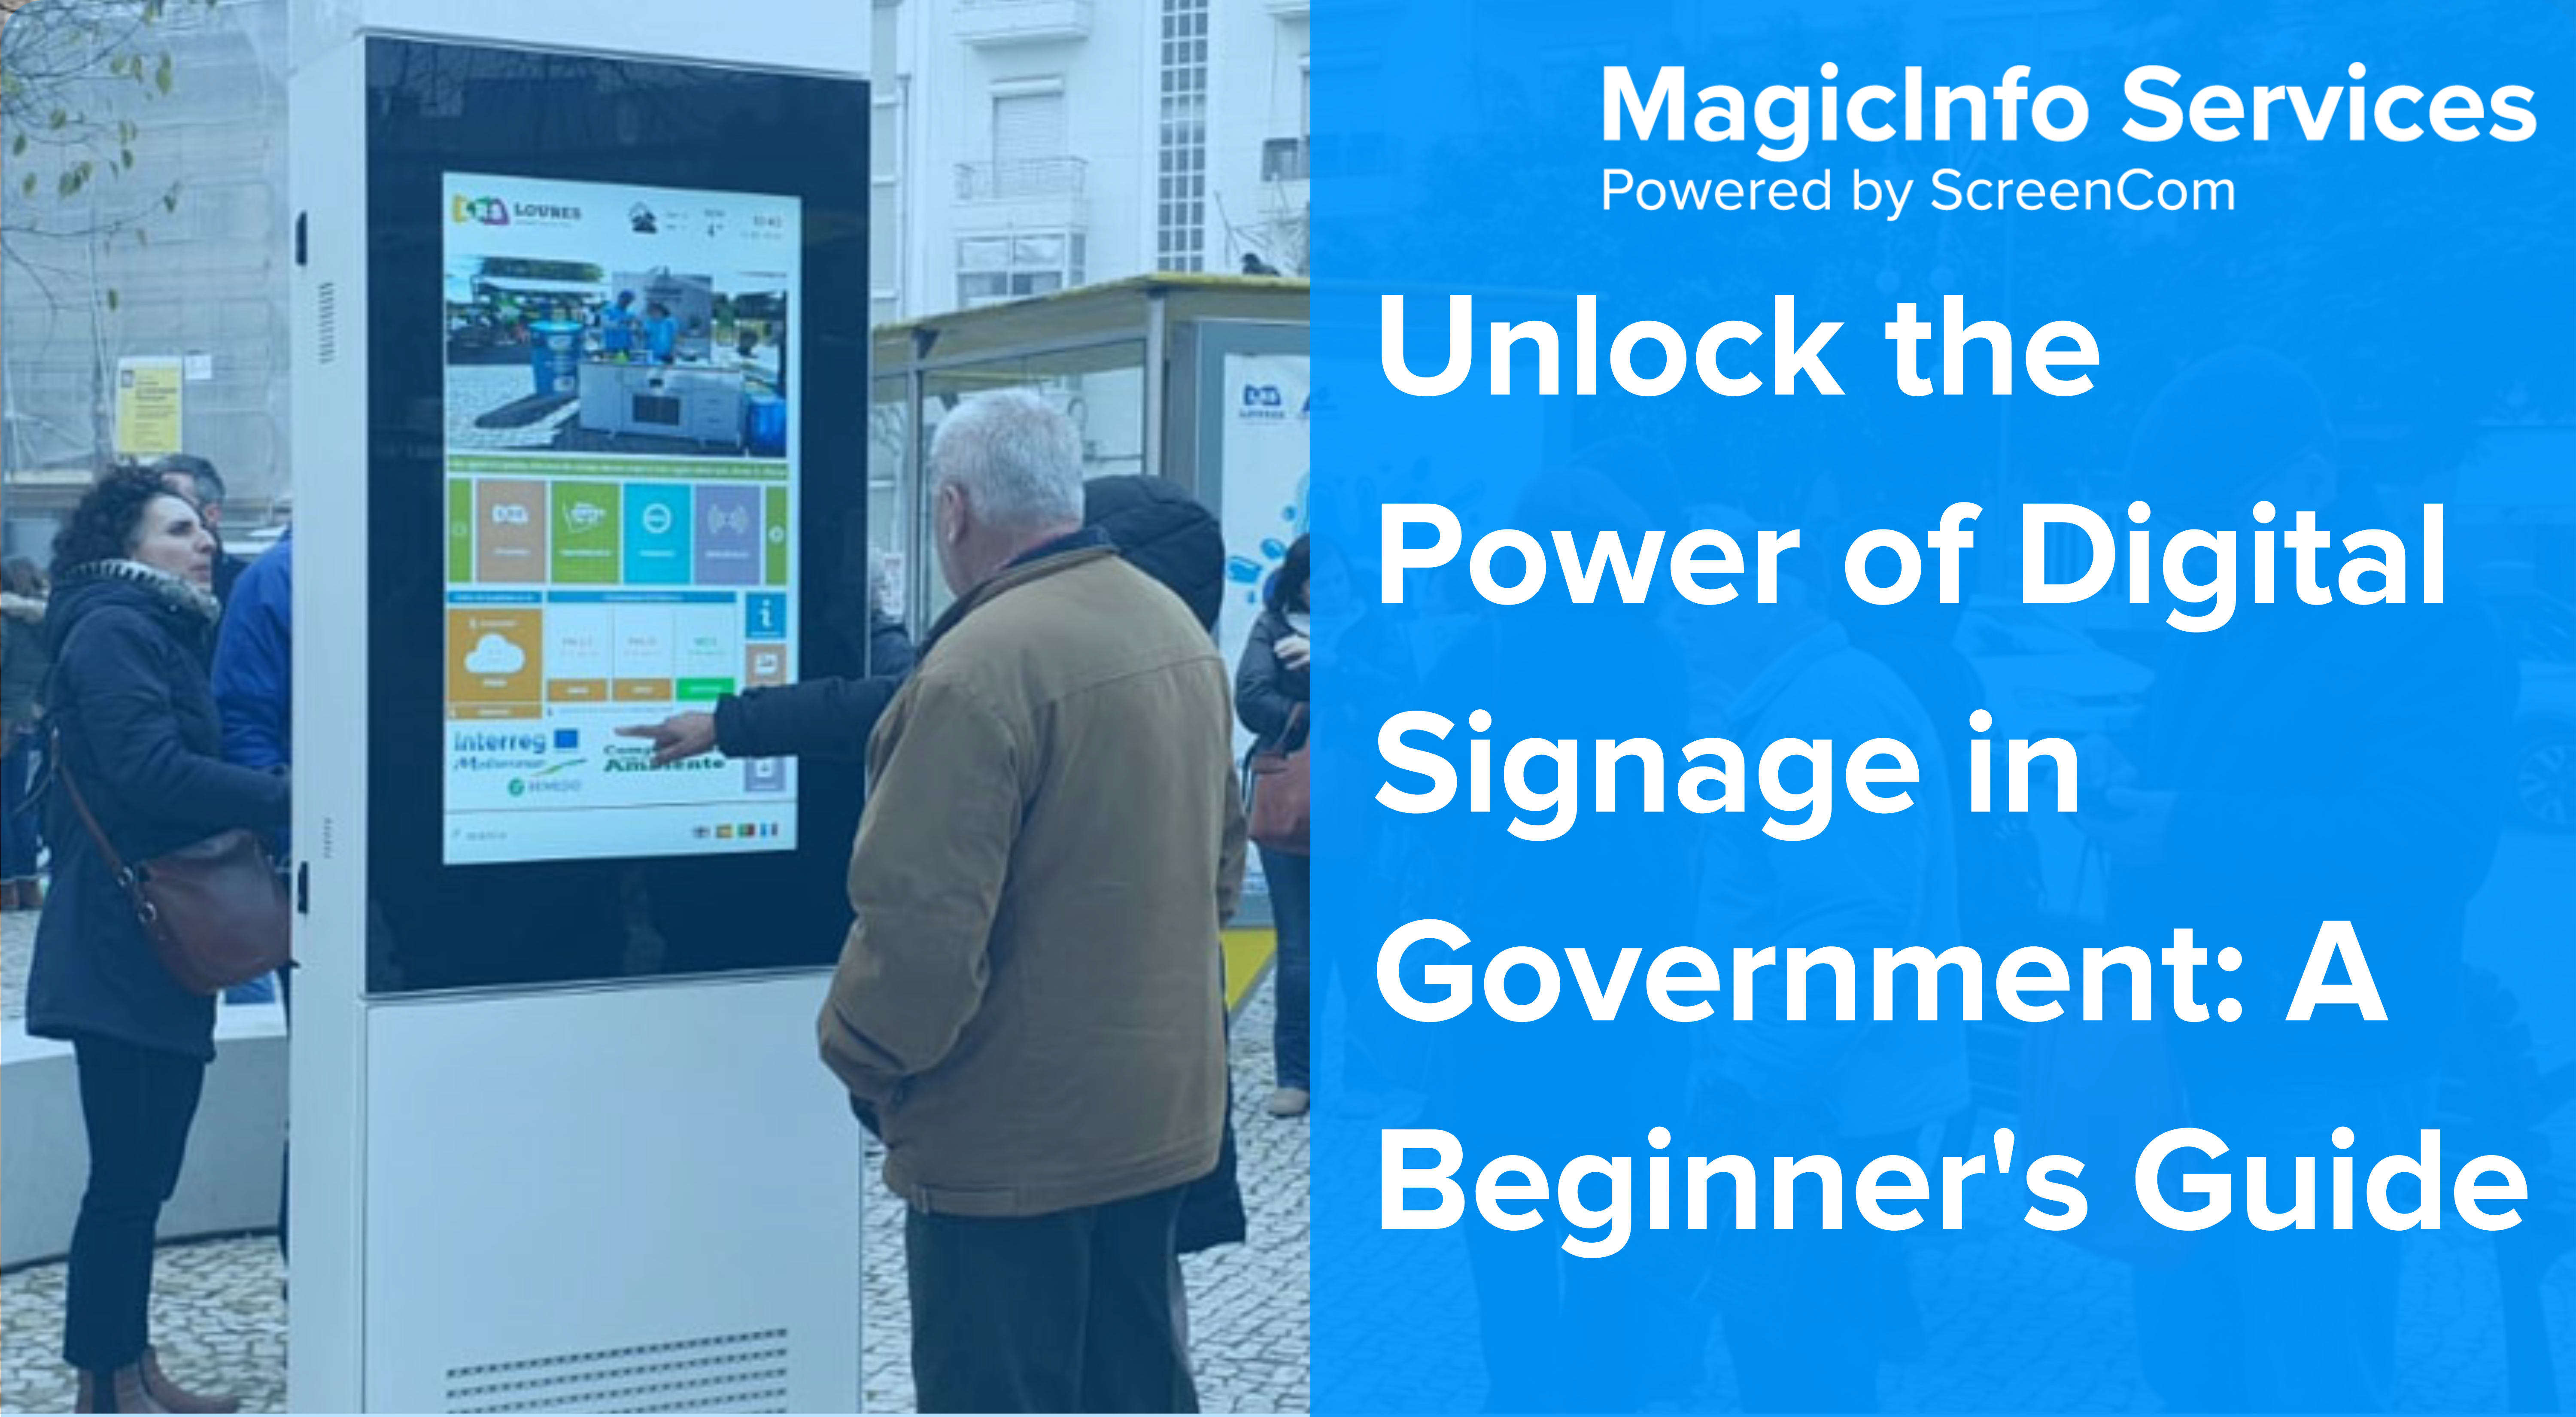 Unlock the Power of Digital Signage in Government: A Beginner's Guide